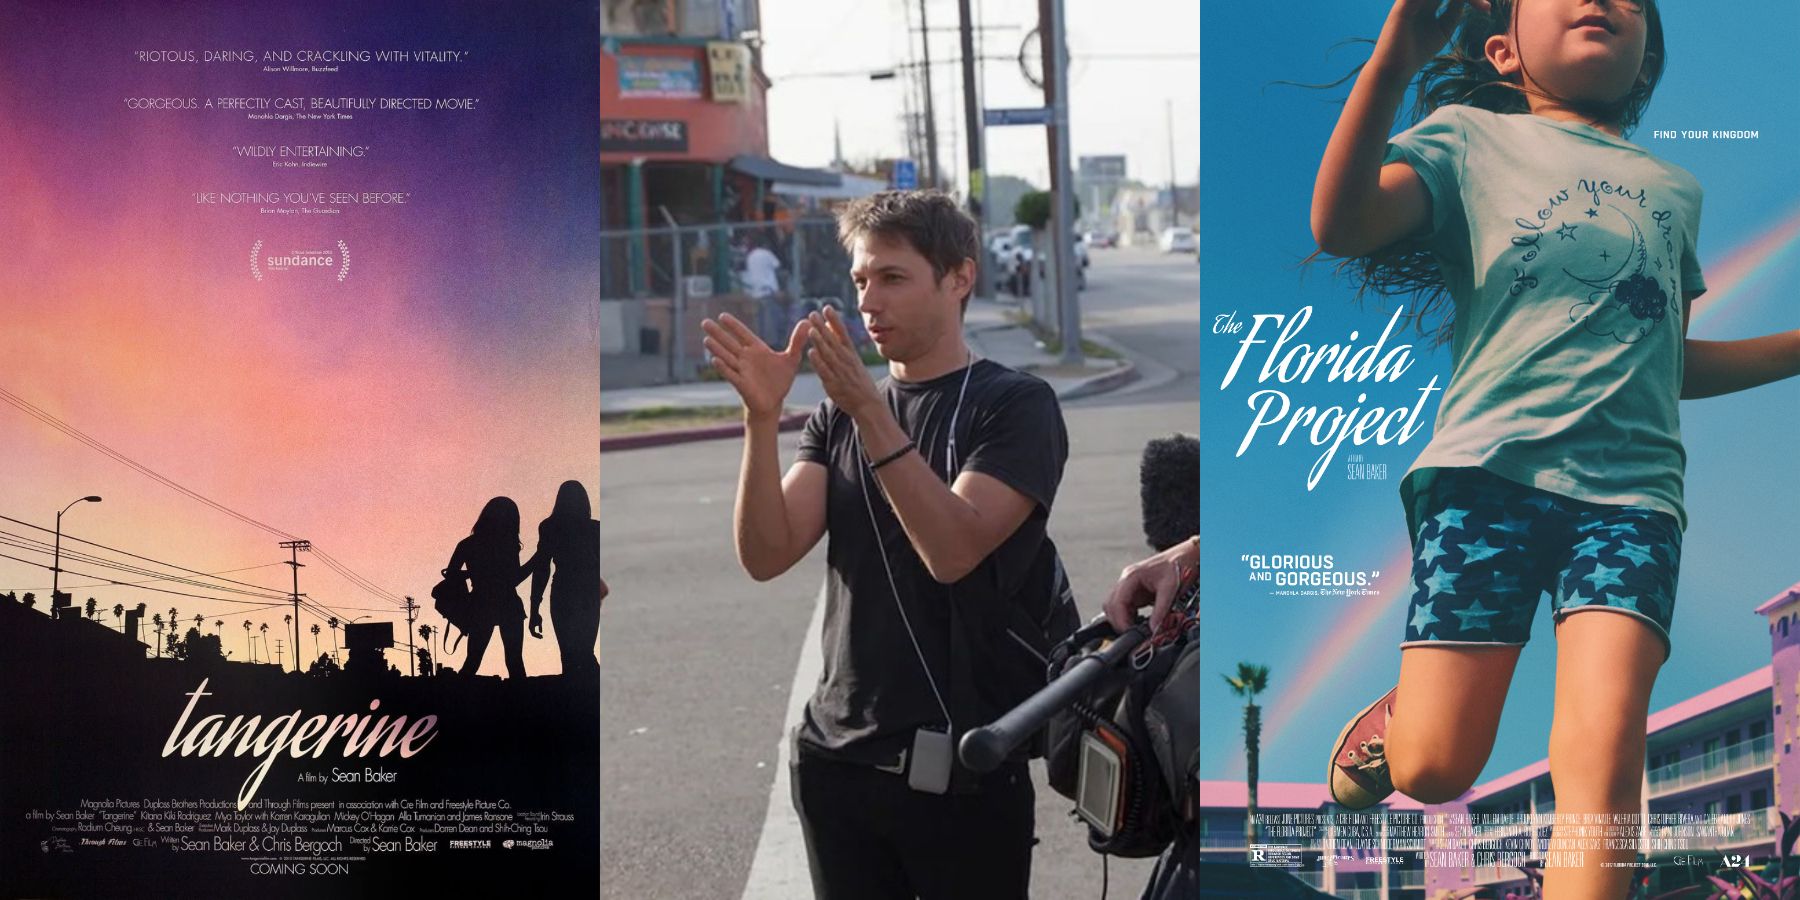 Split image of Sean Baker and posters for Tangerine and The Florida Project